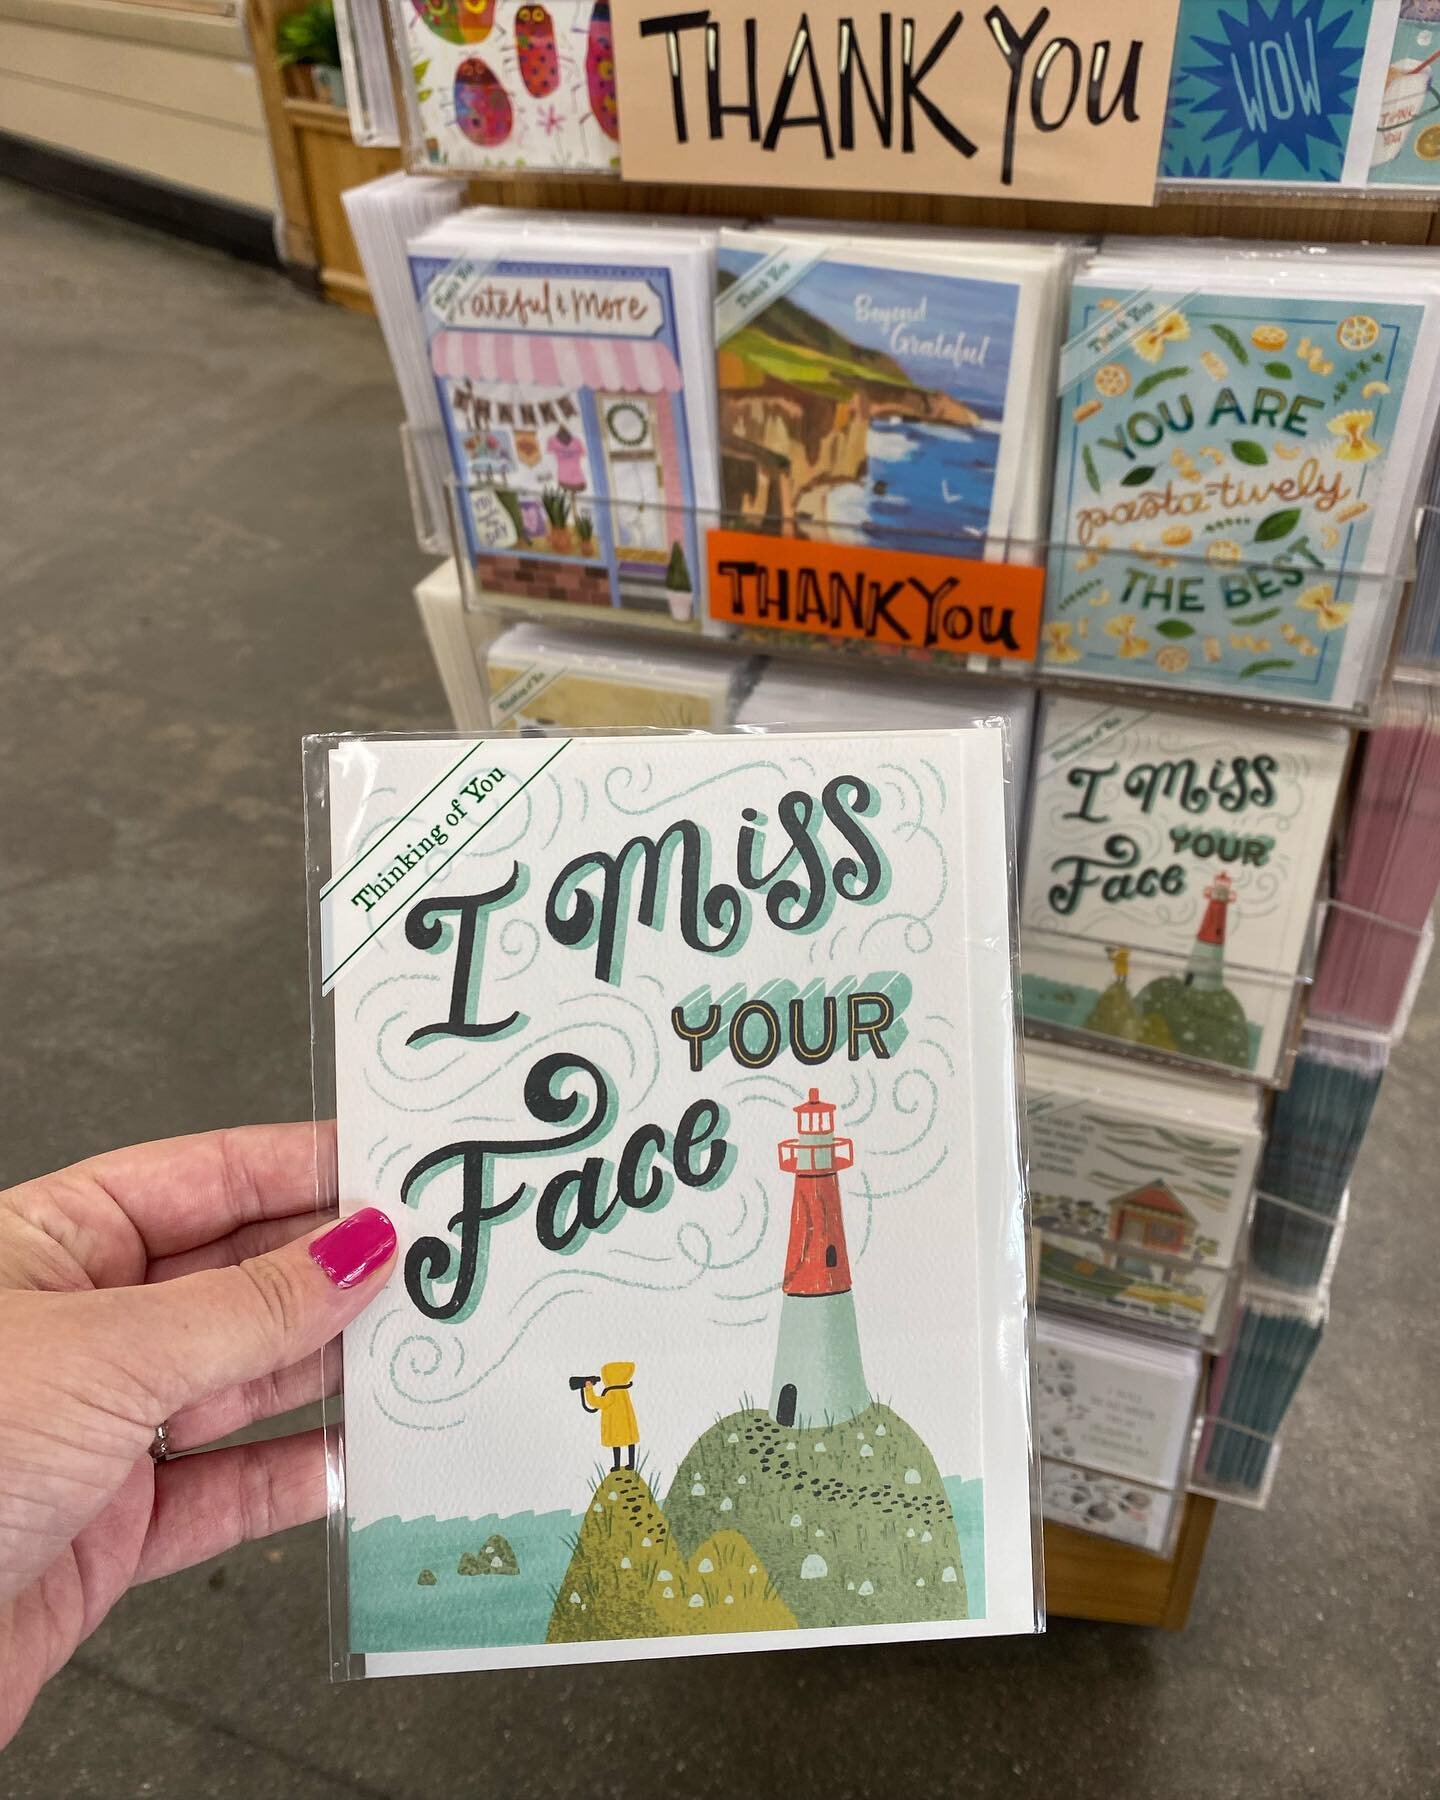 Look out for my card design at your local Trader Joe&rsquo;s! Thanks for the photo @c_ann_p ! #imissyourface #thinkingofyou #handlettering #handtype #illustration #carddesign